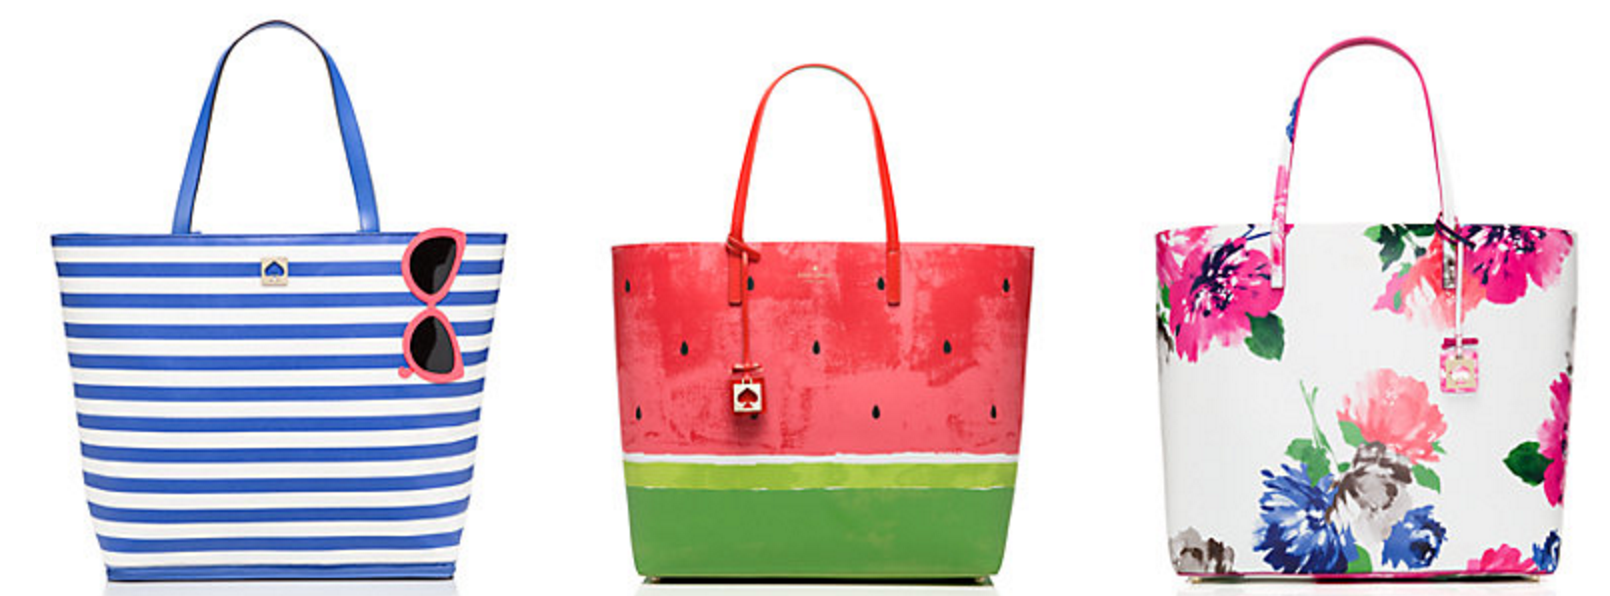 Kate Spade Surprise Sale- up to 75% off - My Frugal Adventures